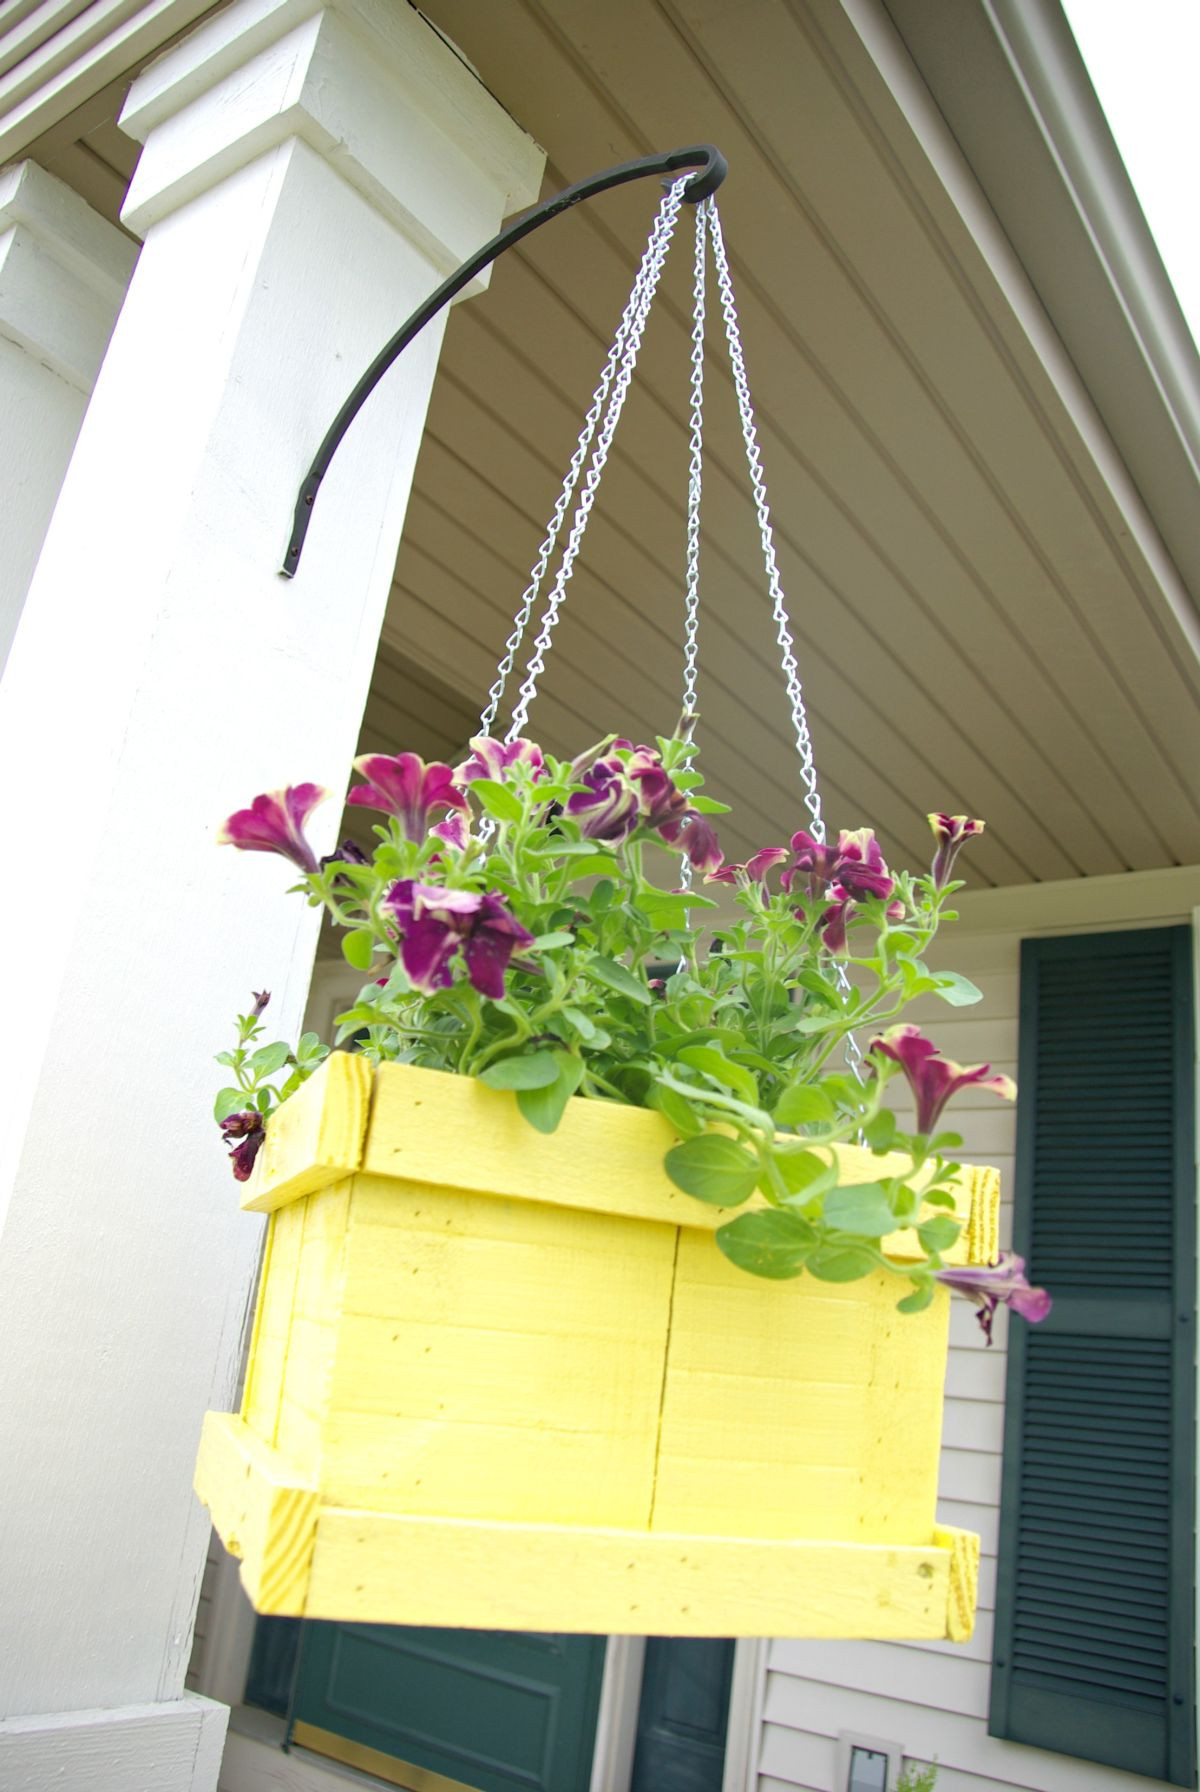 DIY Hanging Planter Box
 DIY Planter Box Ideas To Wel e Spring And Summer With